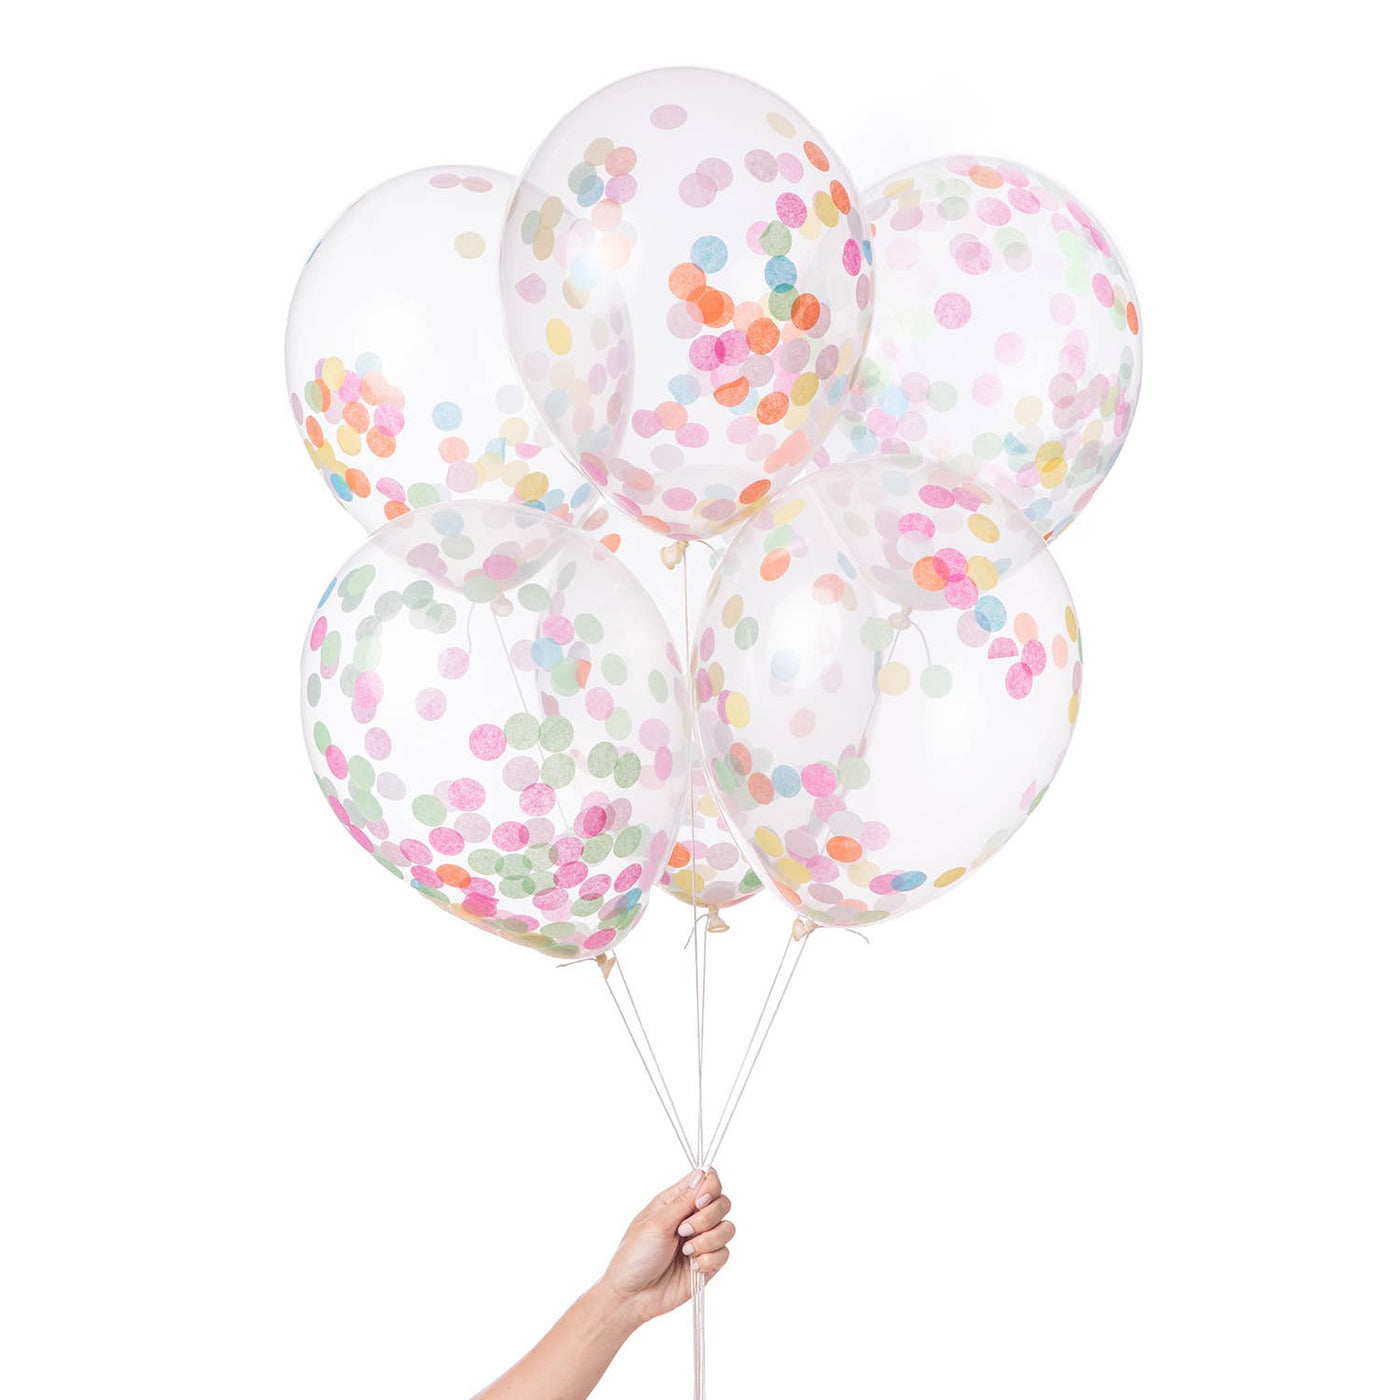 Knot & Bow - Assorted Pre-Filled Confetti Balloons